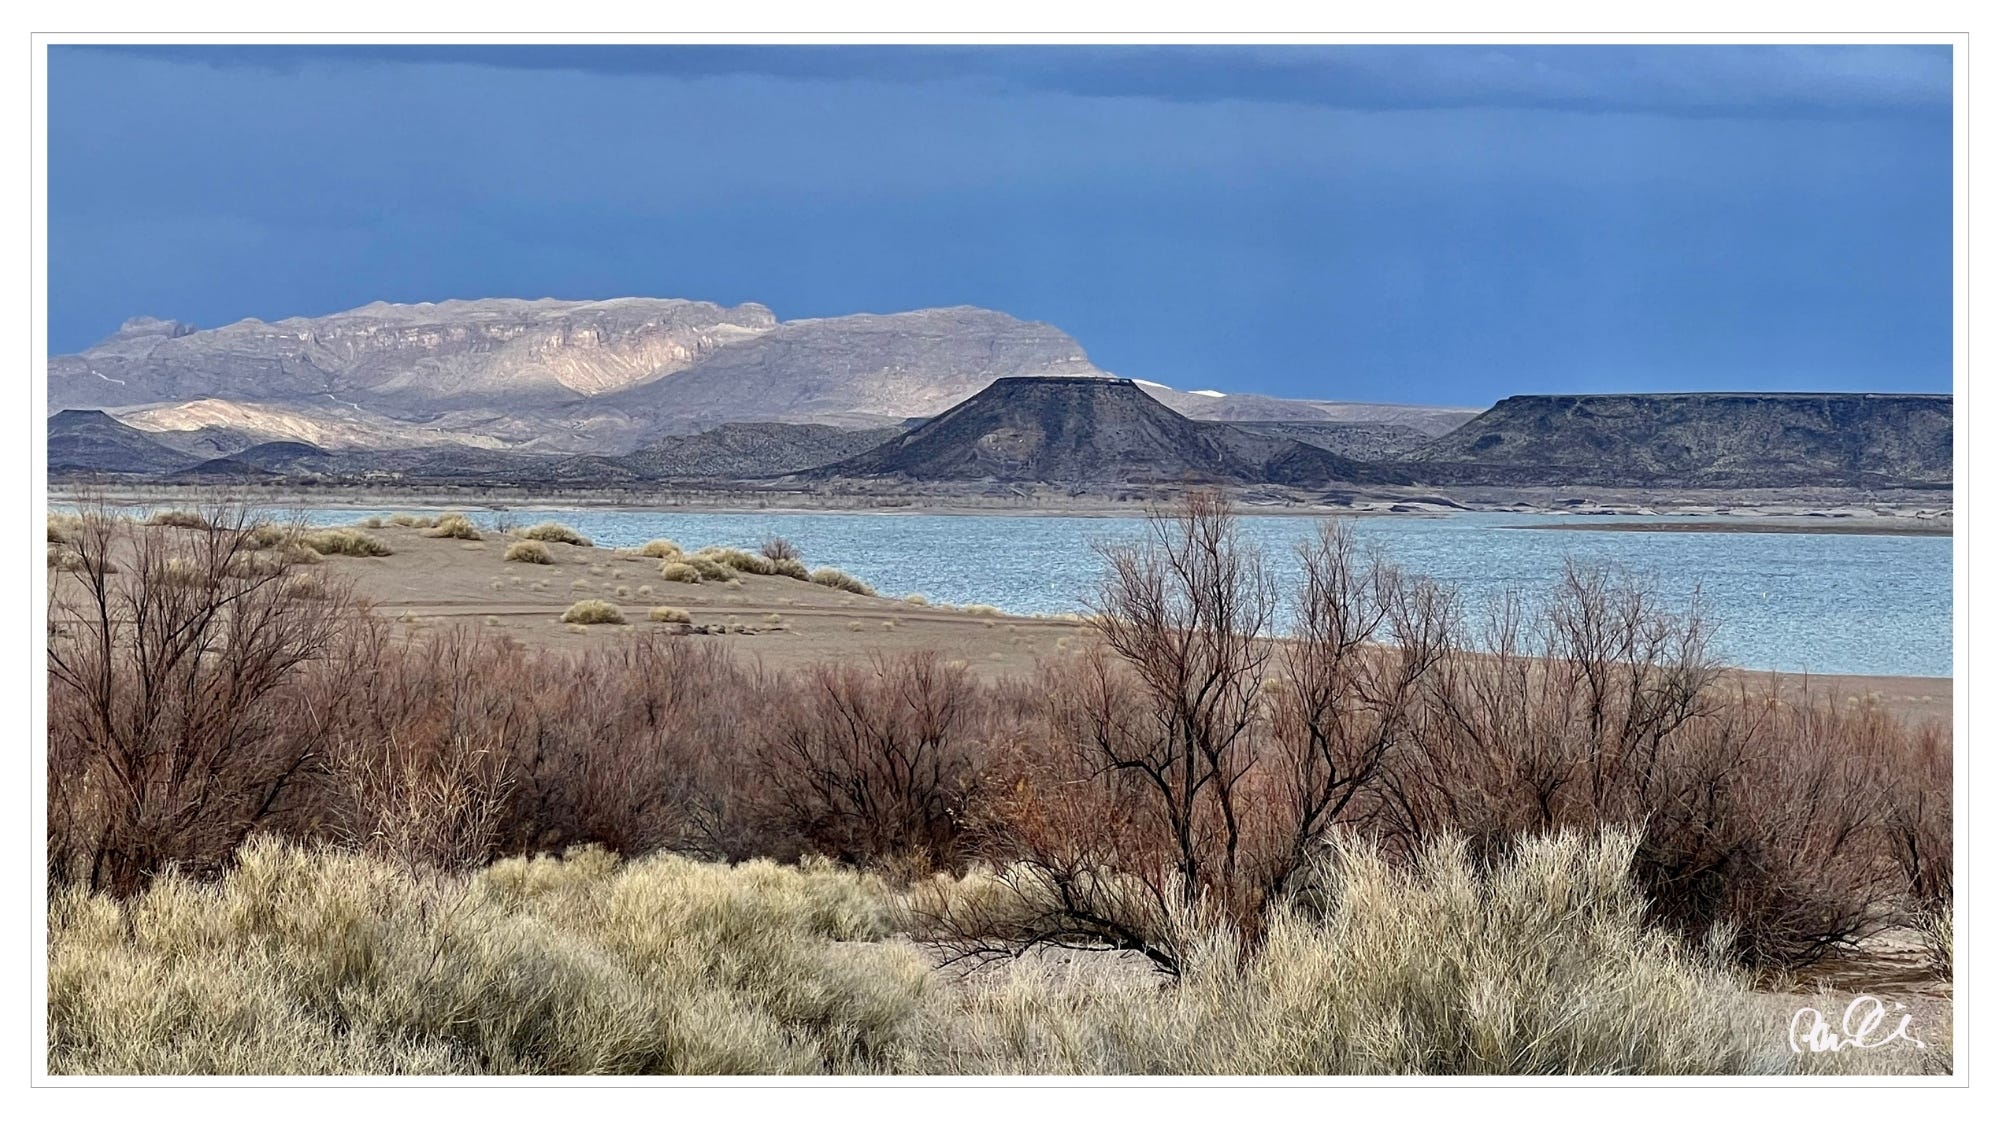 Early morning light on Elephant Butte, NM